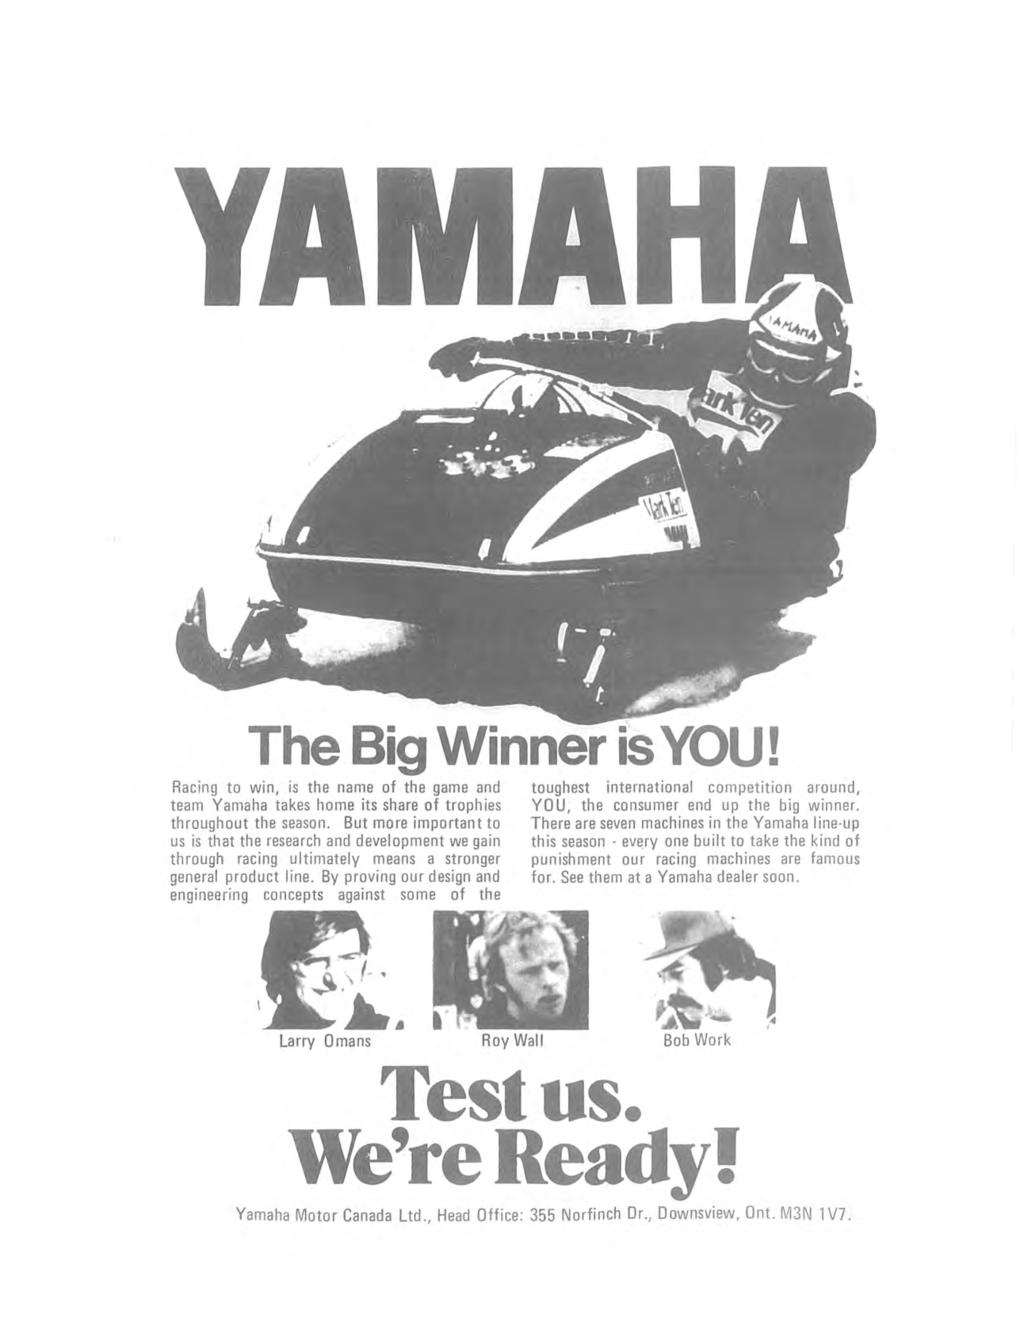 The Big Winner is YOU! Racing to win, is the name of the game and team Yamaha takes home its share of trophies throughout the season.